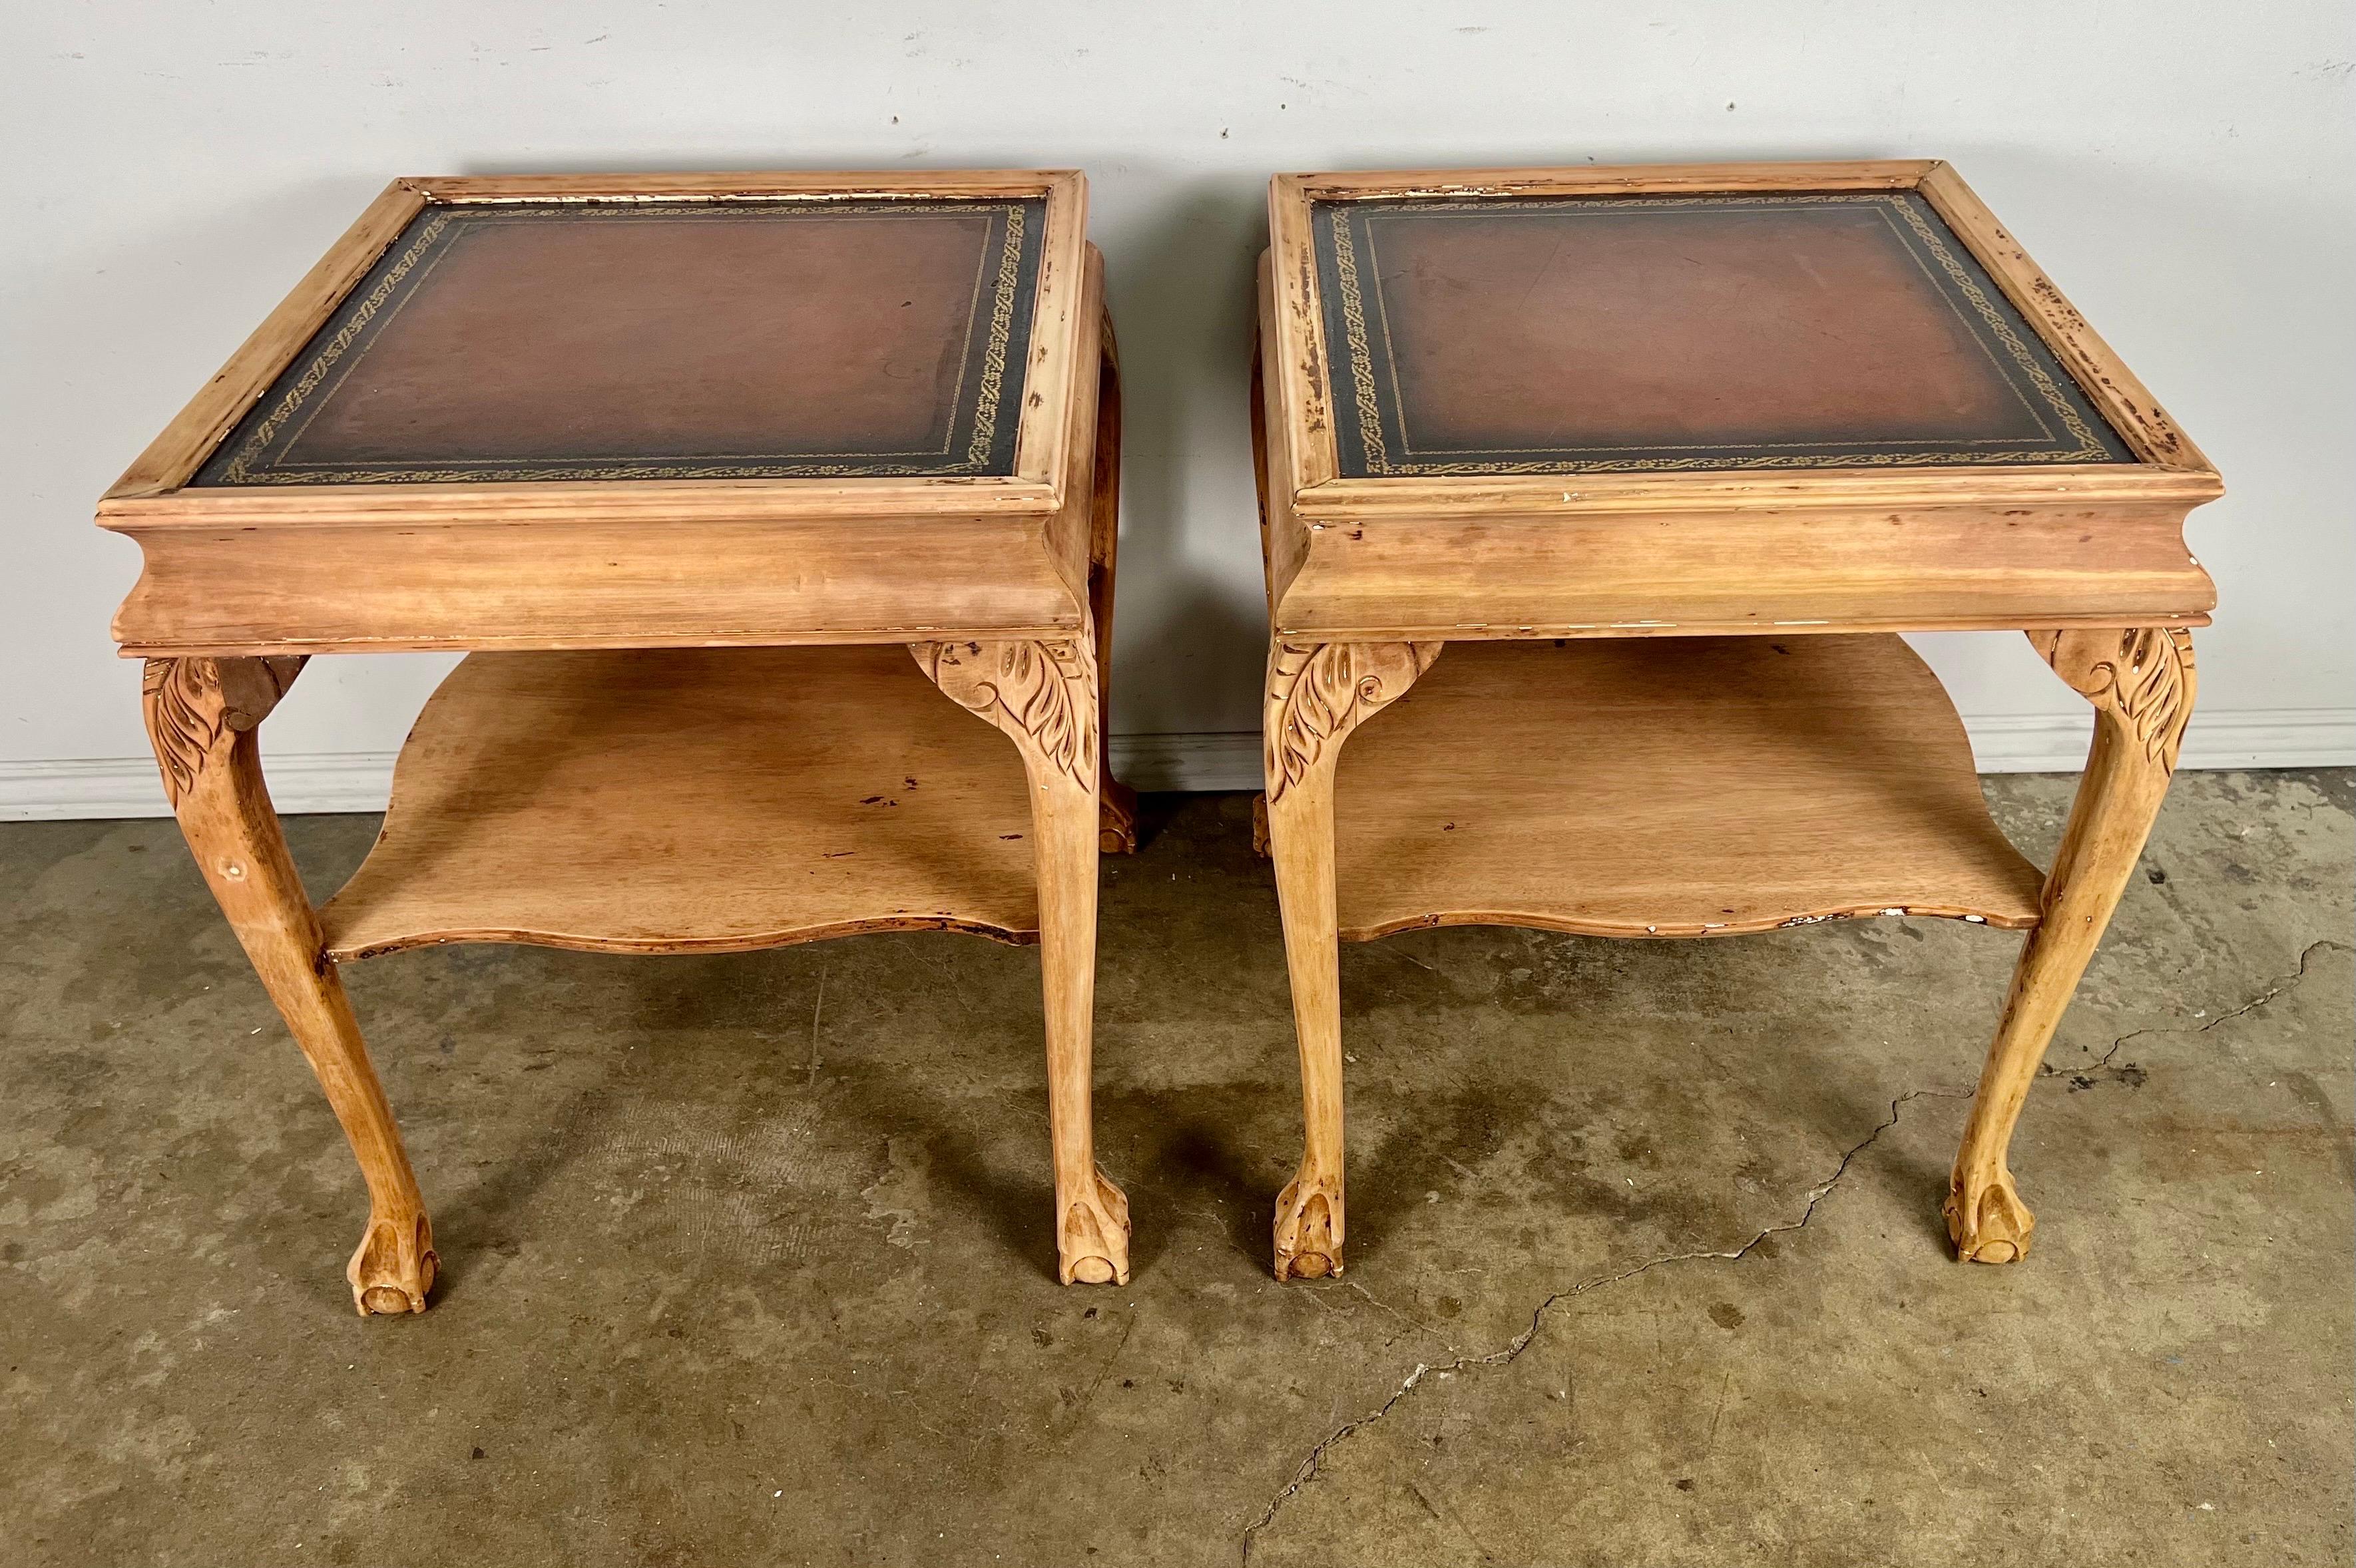 Pair of English Chippendale style bleached mahogany side tables. The tables have rich colored finely gold embossed leather tops. The tables stand on four legs that end in beautifully carved ball & claw feet. The legs are connected by a bottom